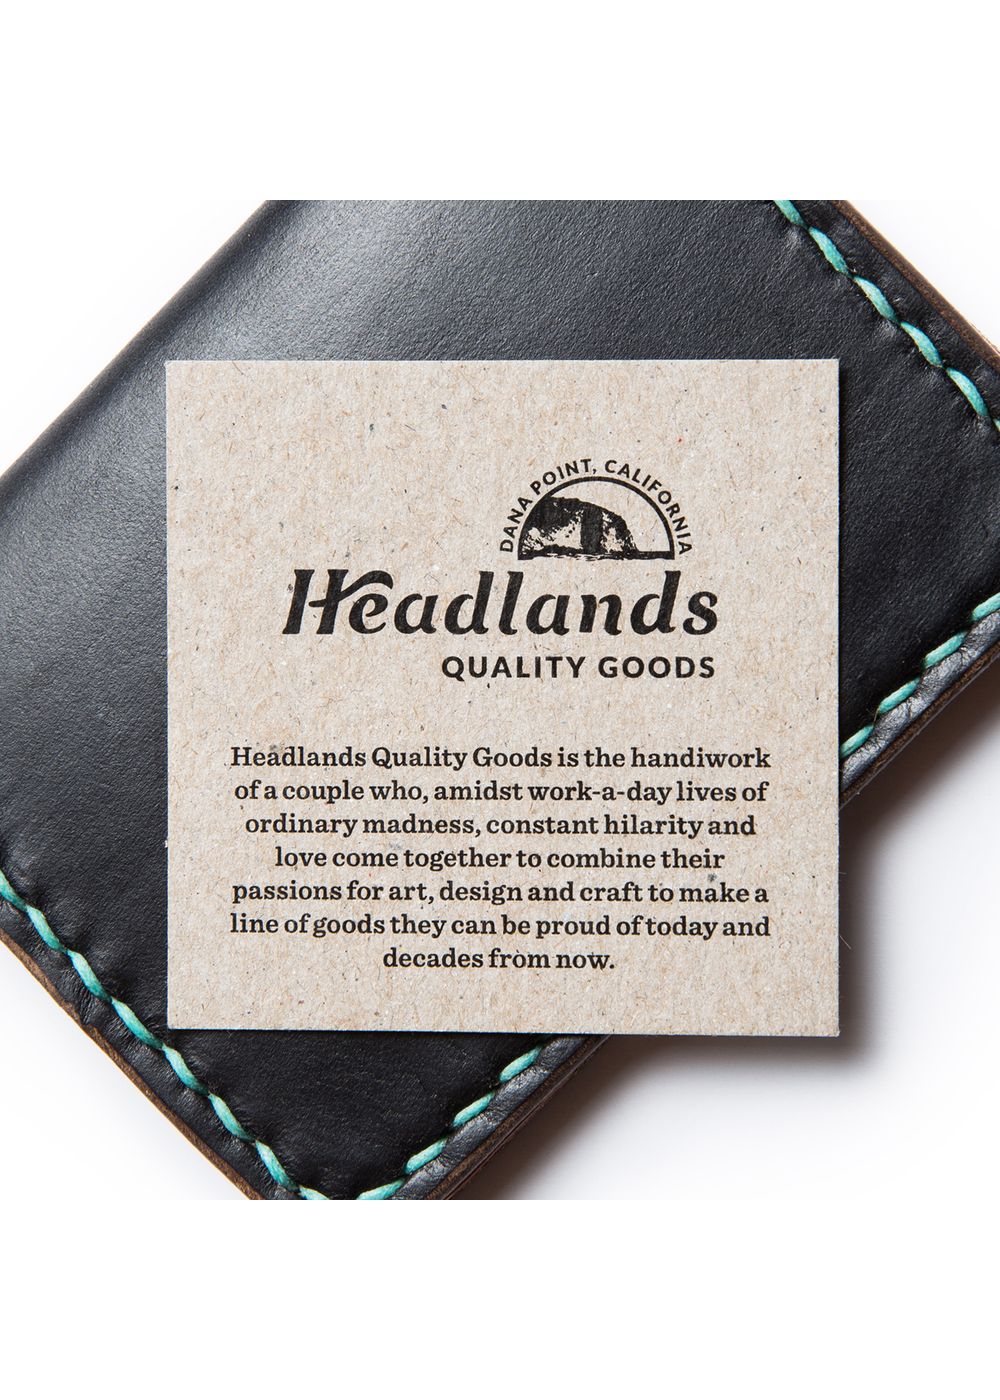 Black Leather Headlands Cash Fold Wallet with White Stiching. Headlands Quality Goods Card